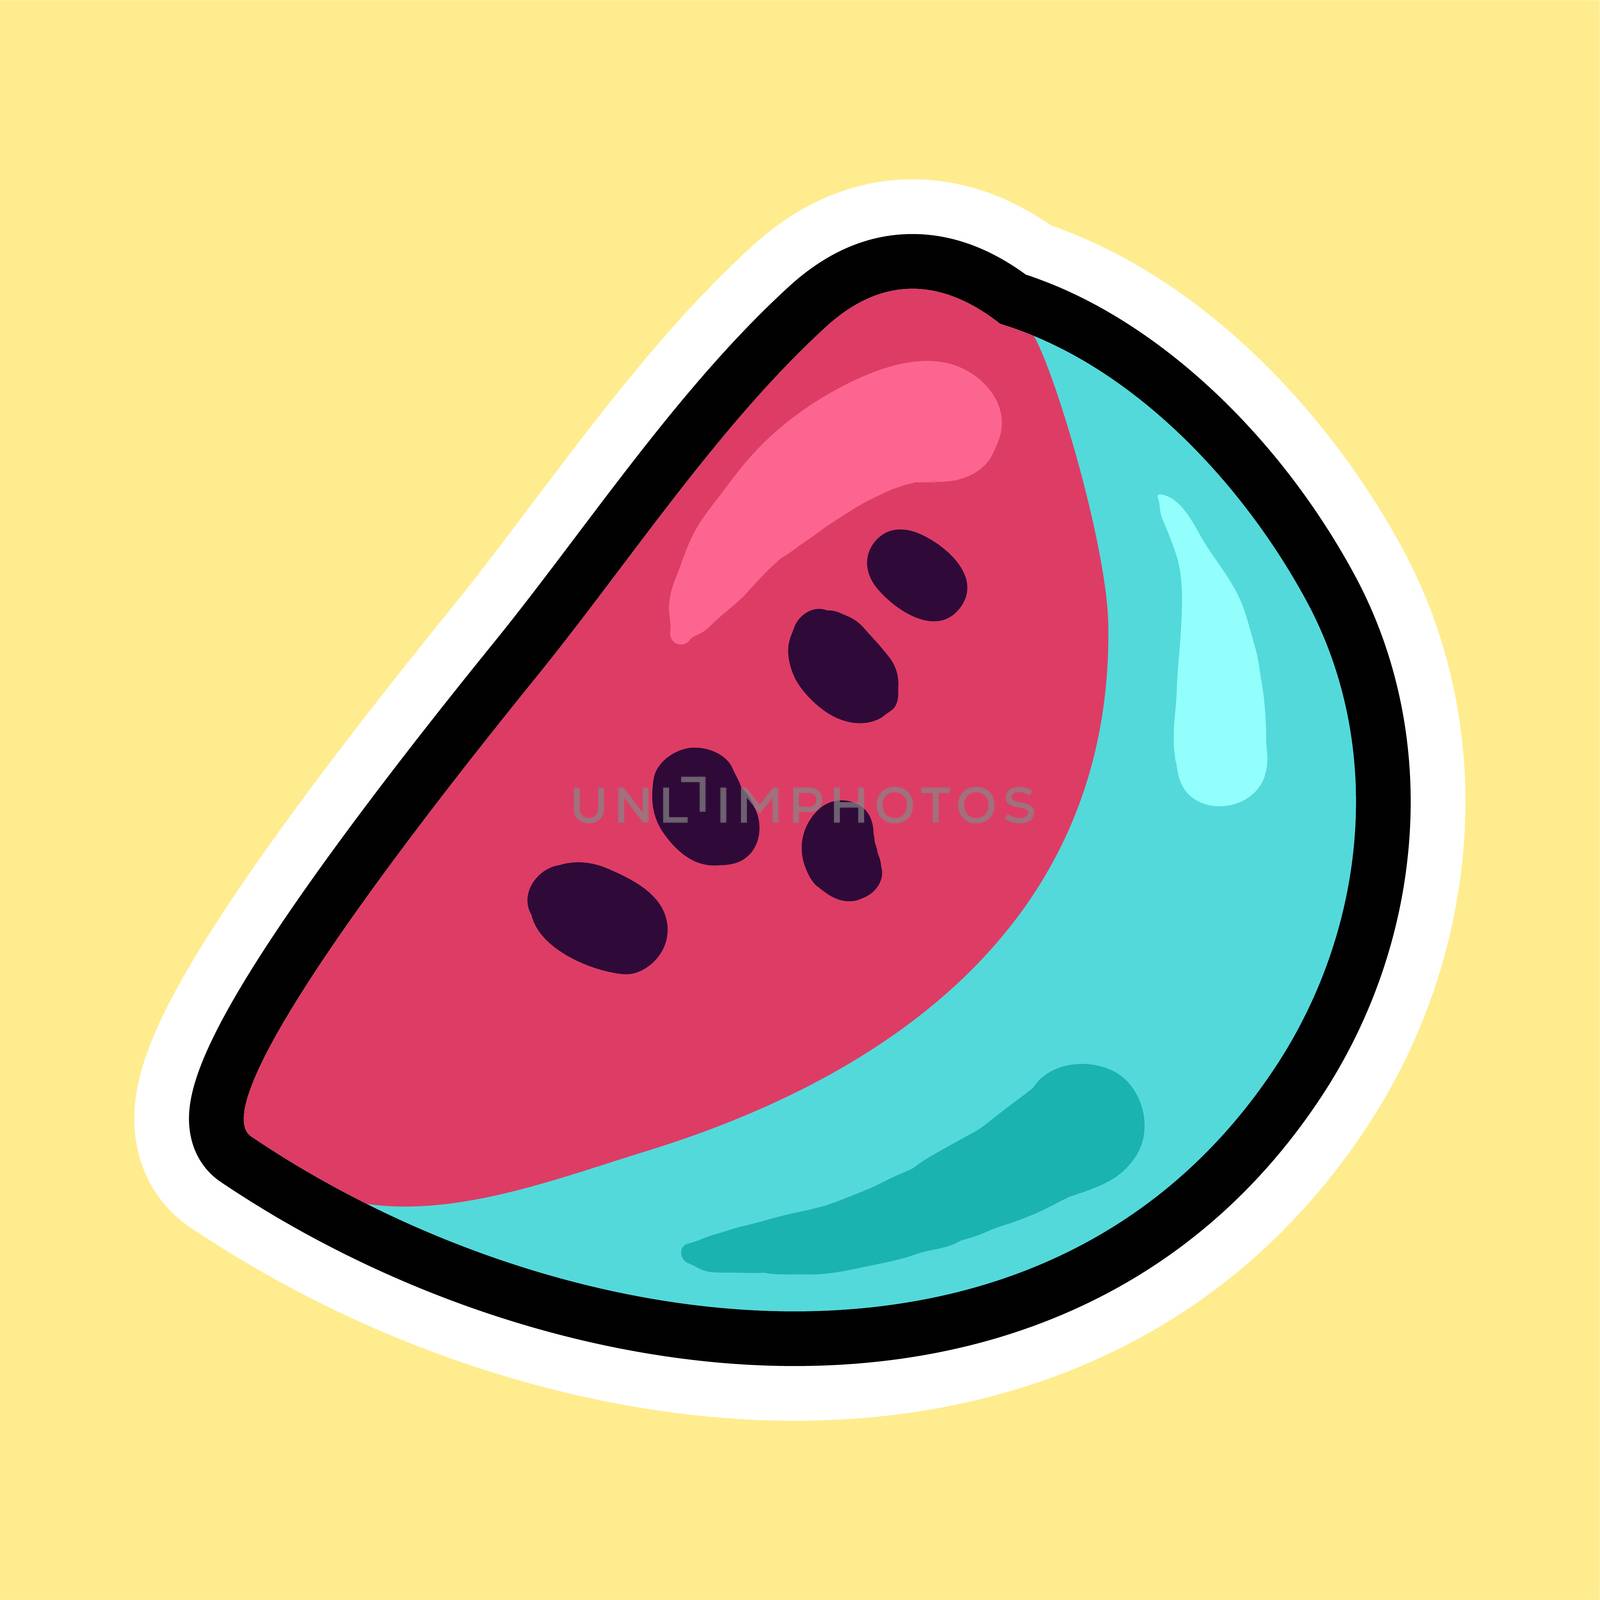 Watermelon cartoon sticker. Sweet fruit label. Patch and print for t-shirt, fabric, clothes. Menu item. Juice and summer symbol. Vector